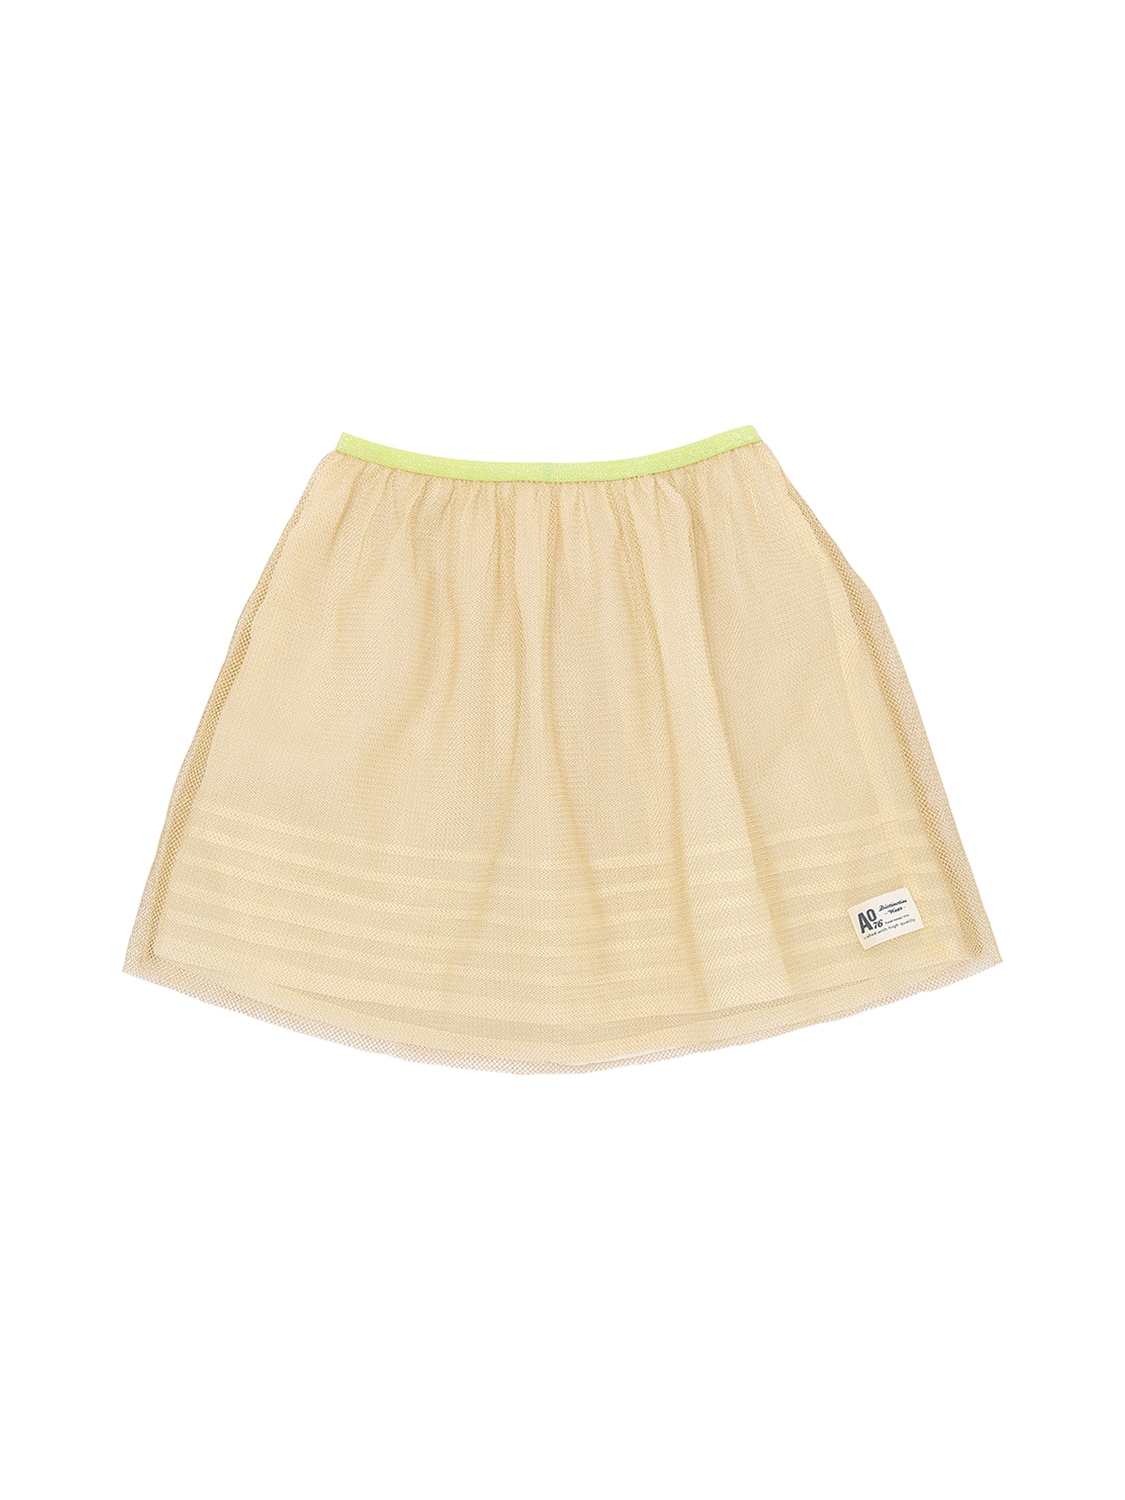 American Outfitters Kids' Stretch Tulle & Muslin Skirt In Gold